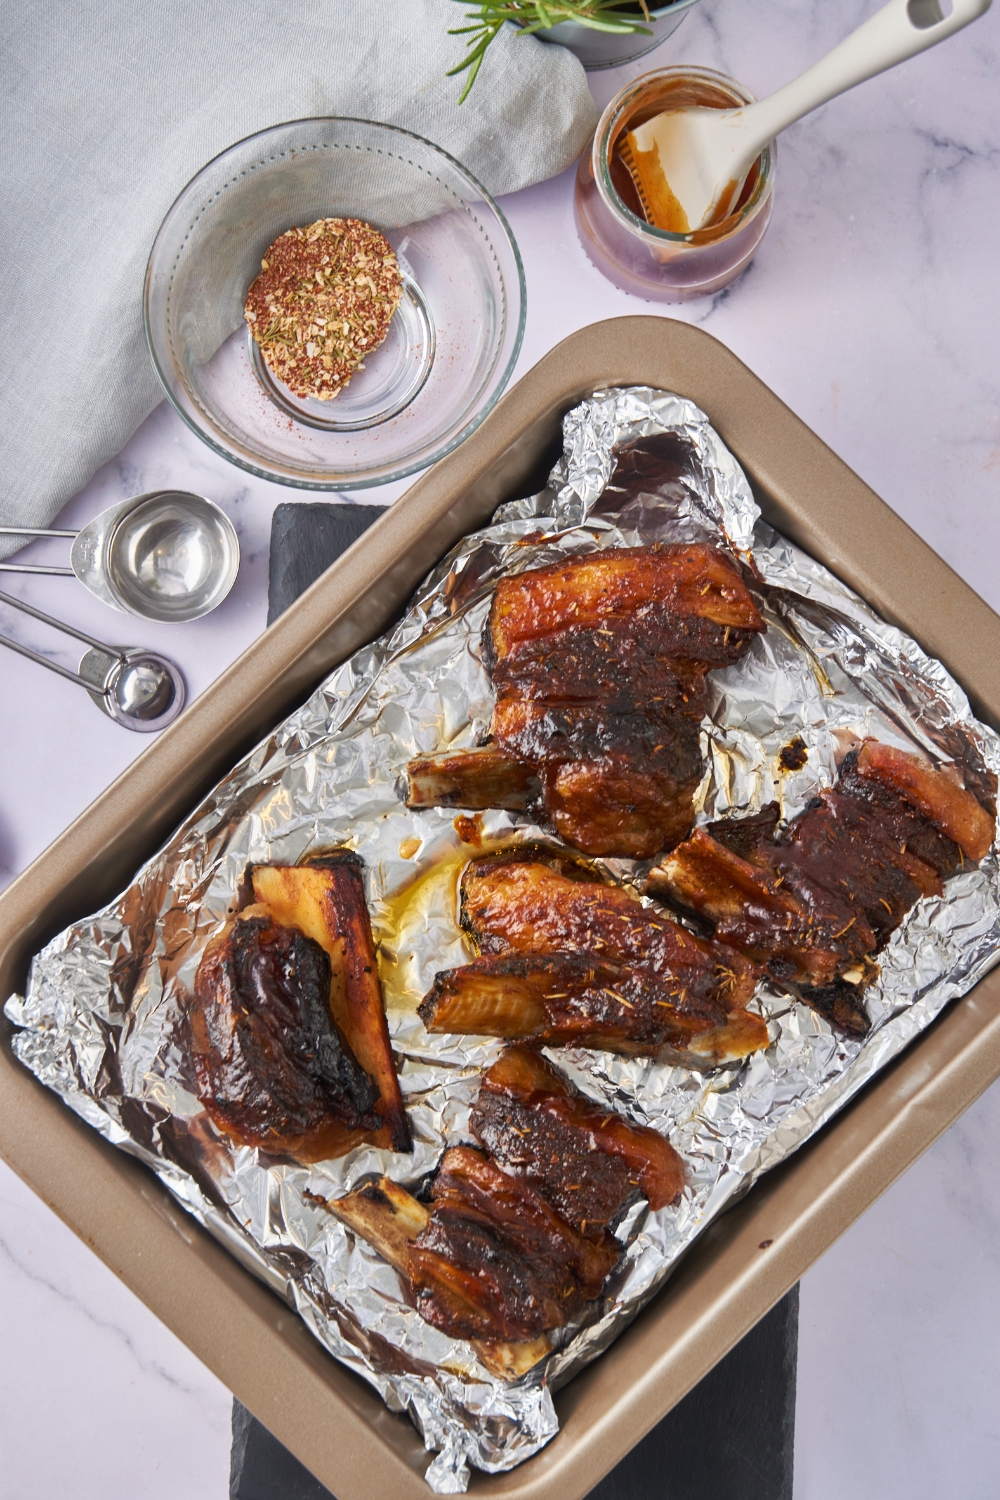 A baking dish lined with foil and filled with baked beef back ribs coated in BBQ sauce.